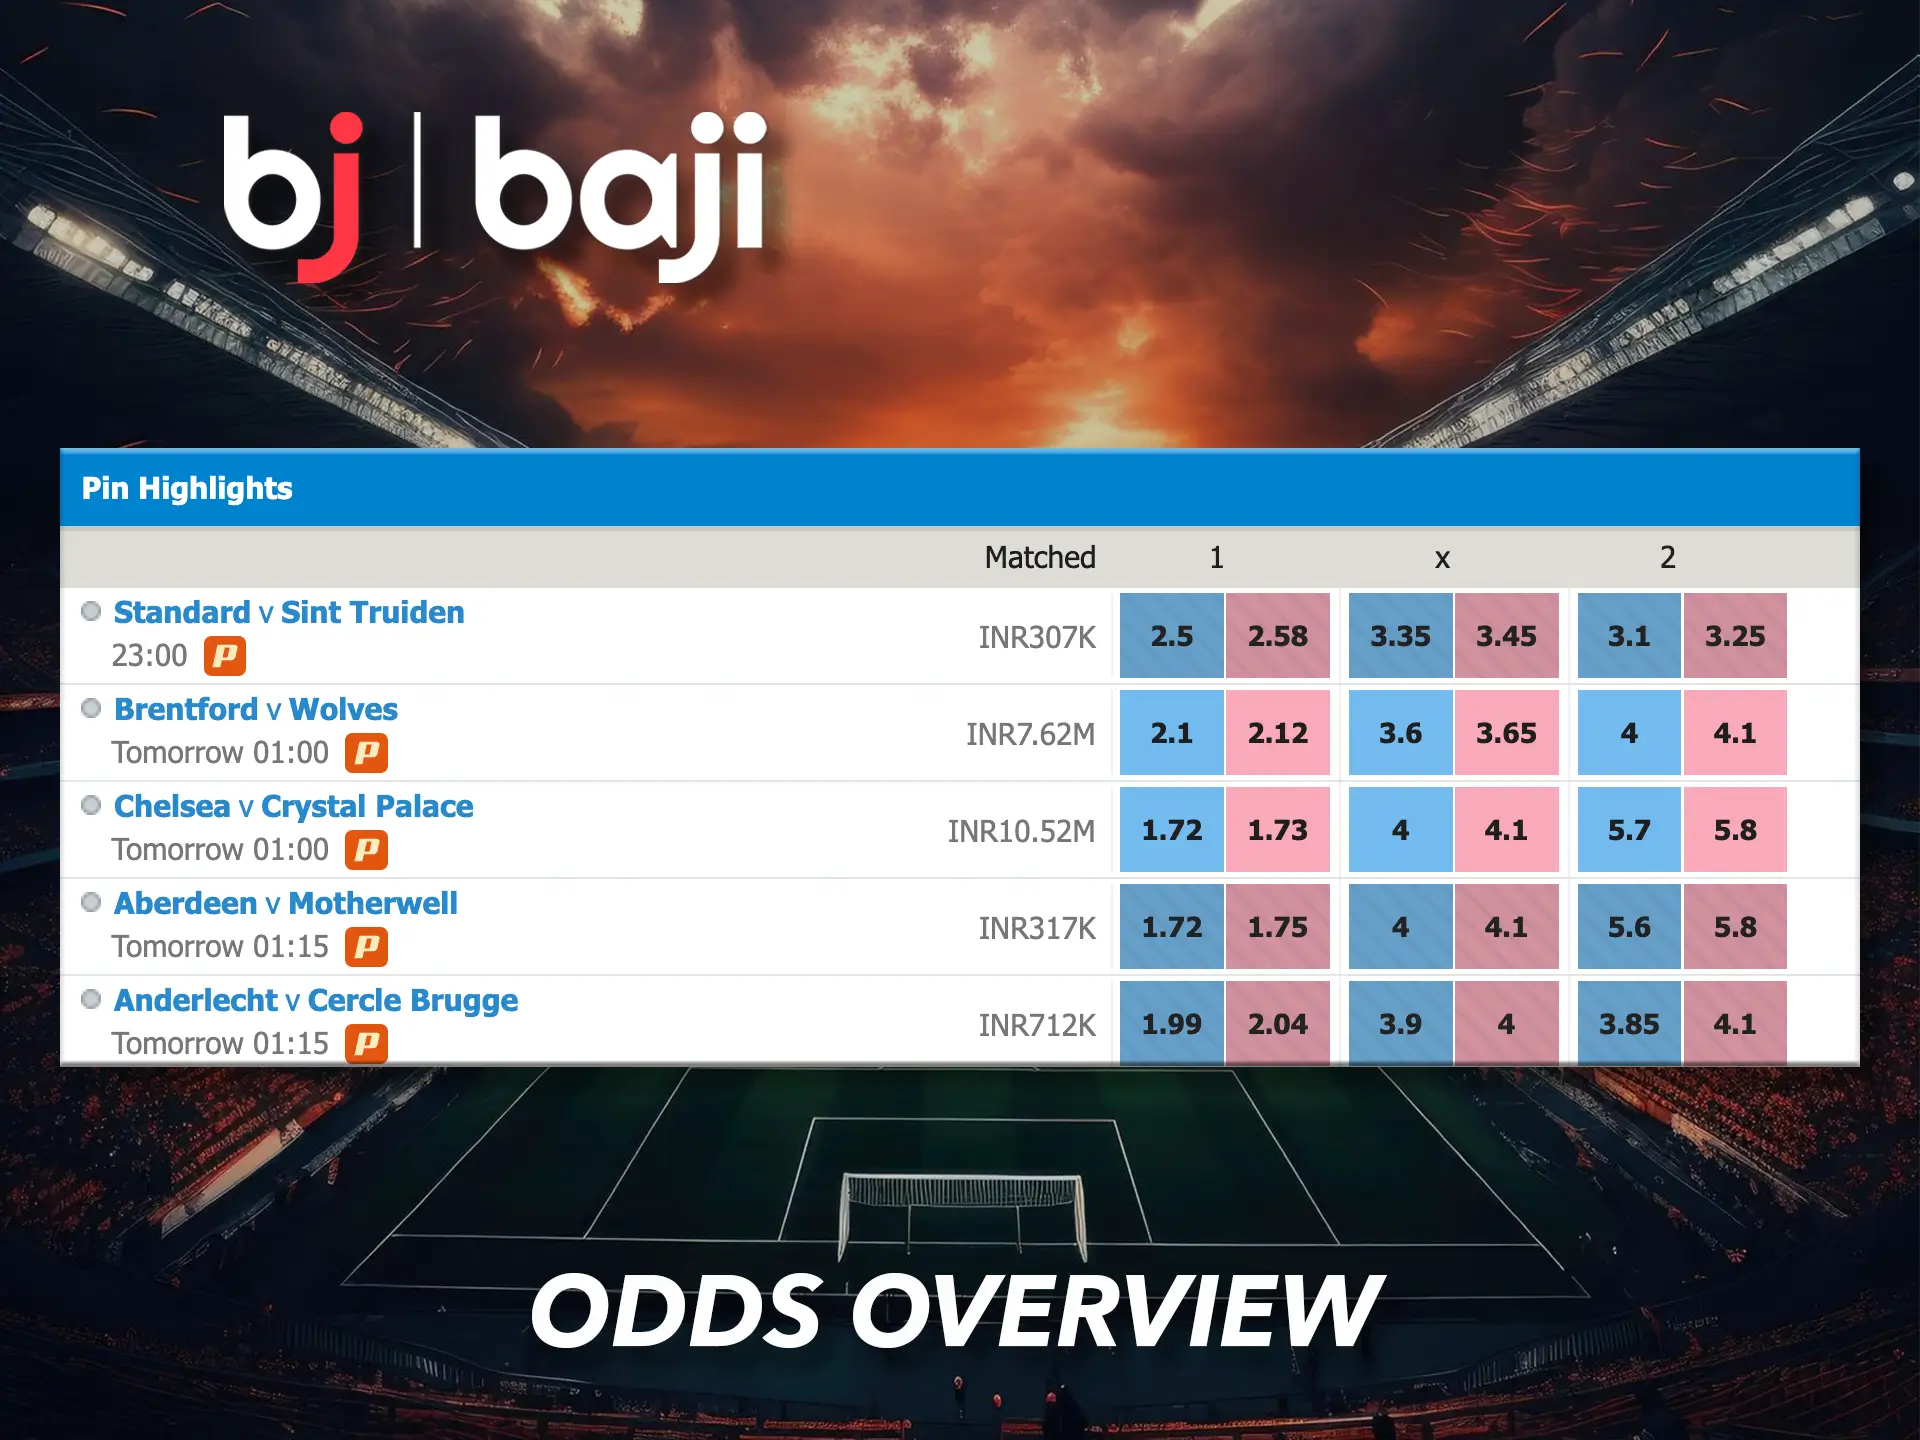 The variety of odds in Baji gives you a good opportunity to make money.